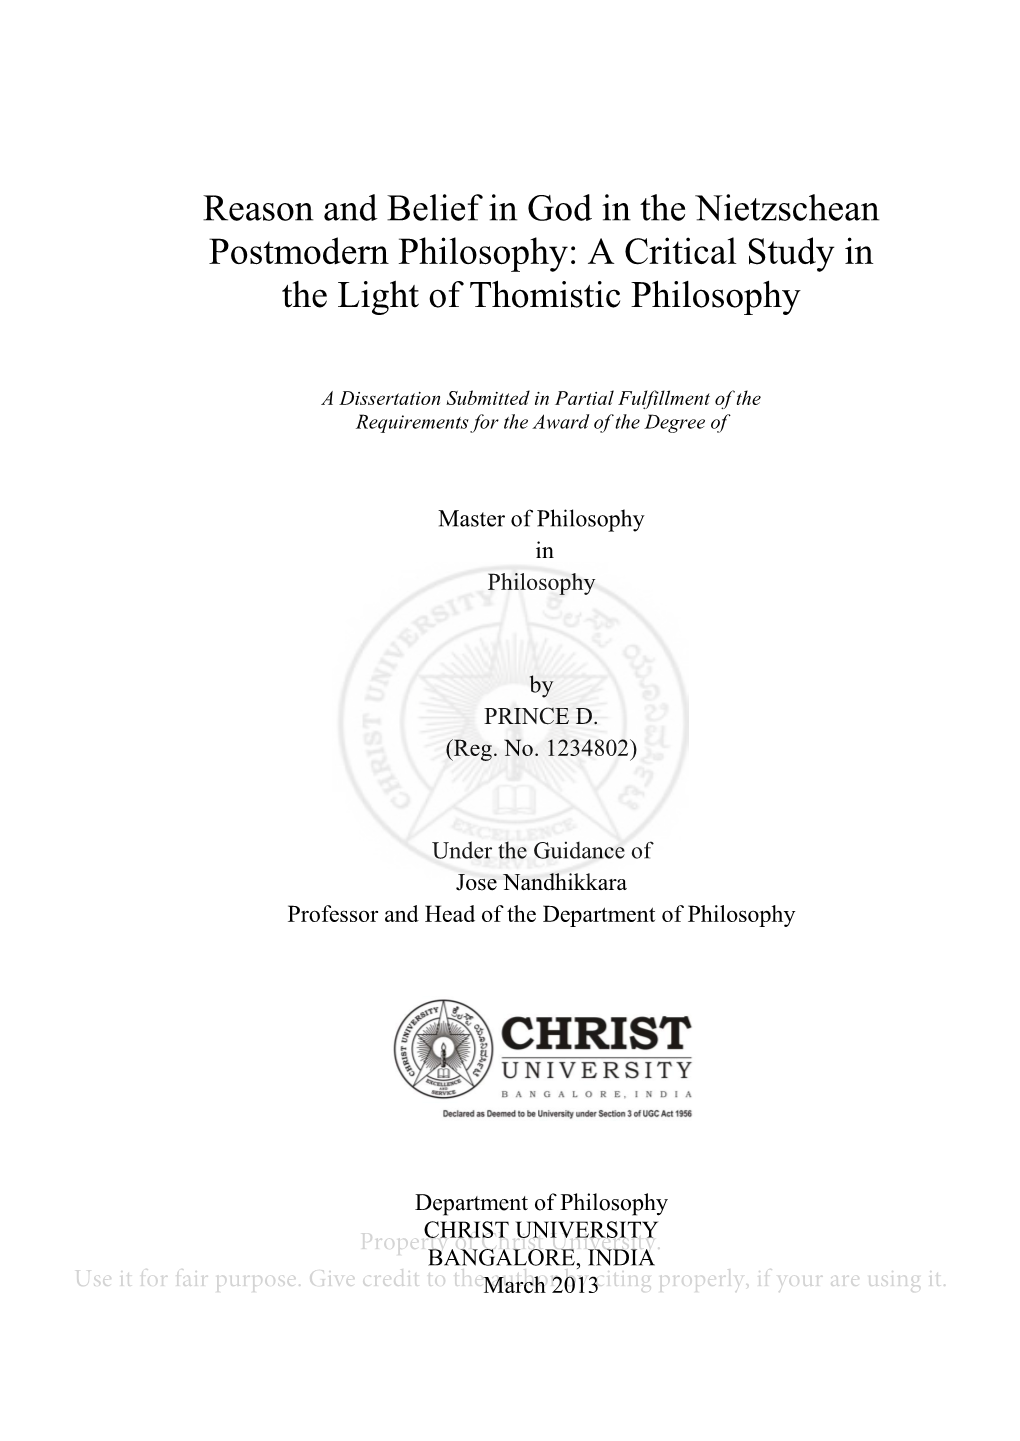 Reason and Belief in God in the Nietzschean Postmodern Philosophy: a Critical Study in the Light of Thomistic Philosophy